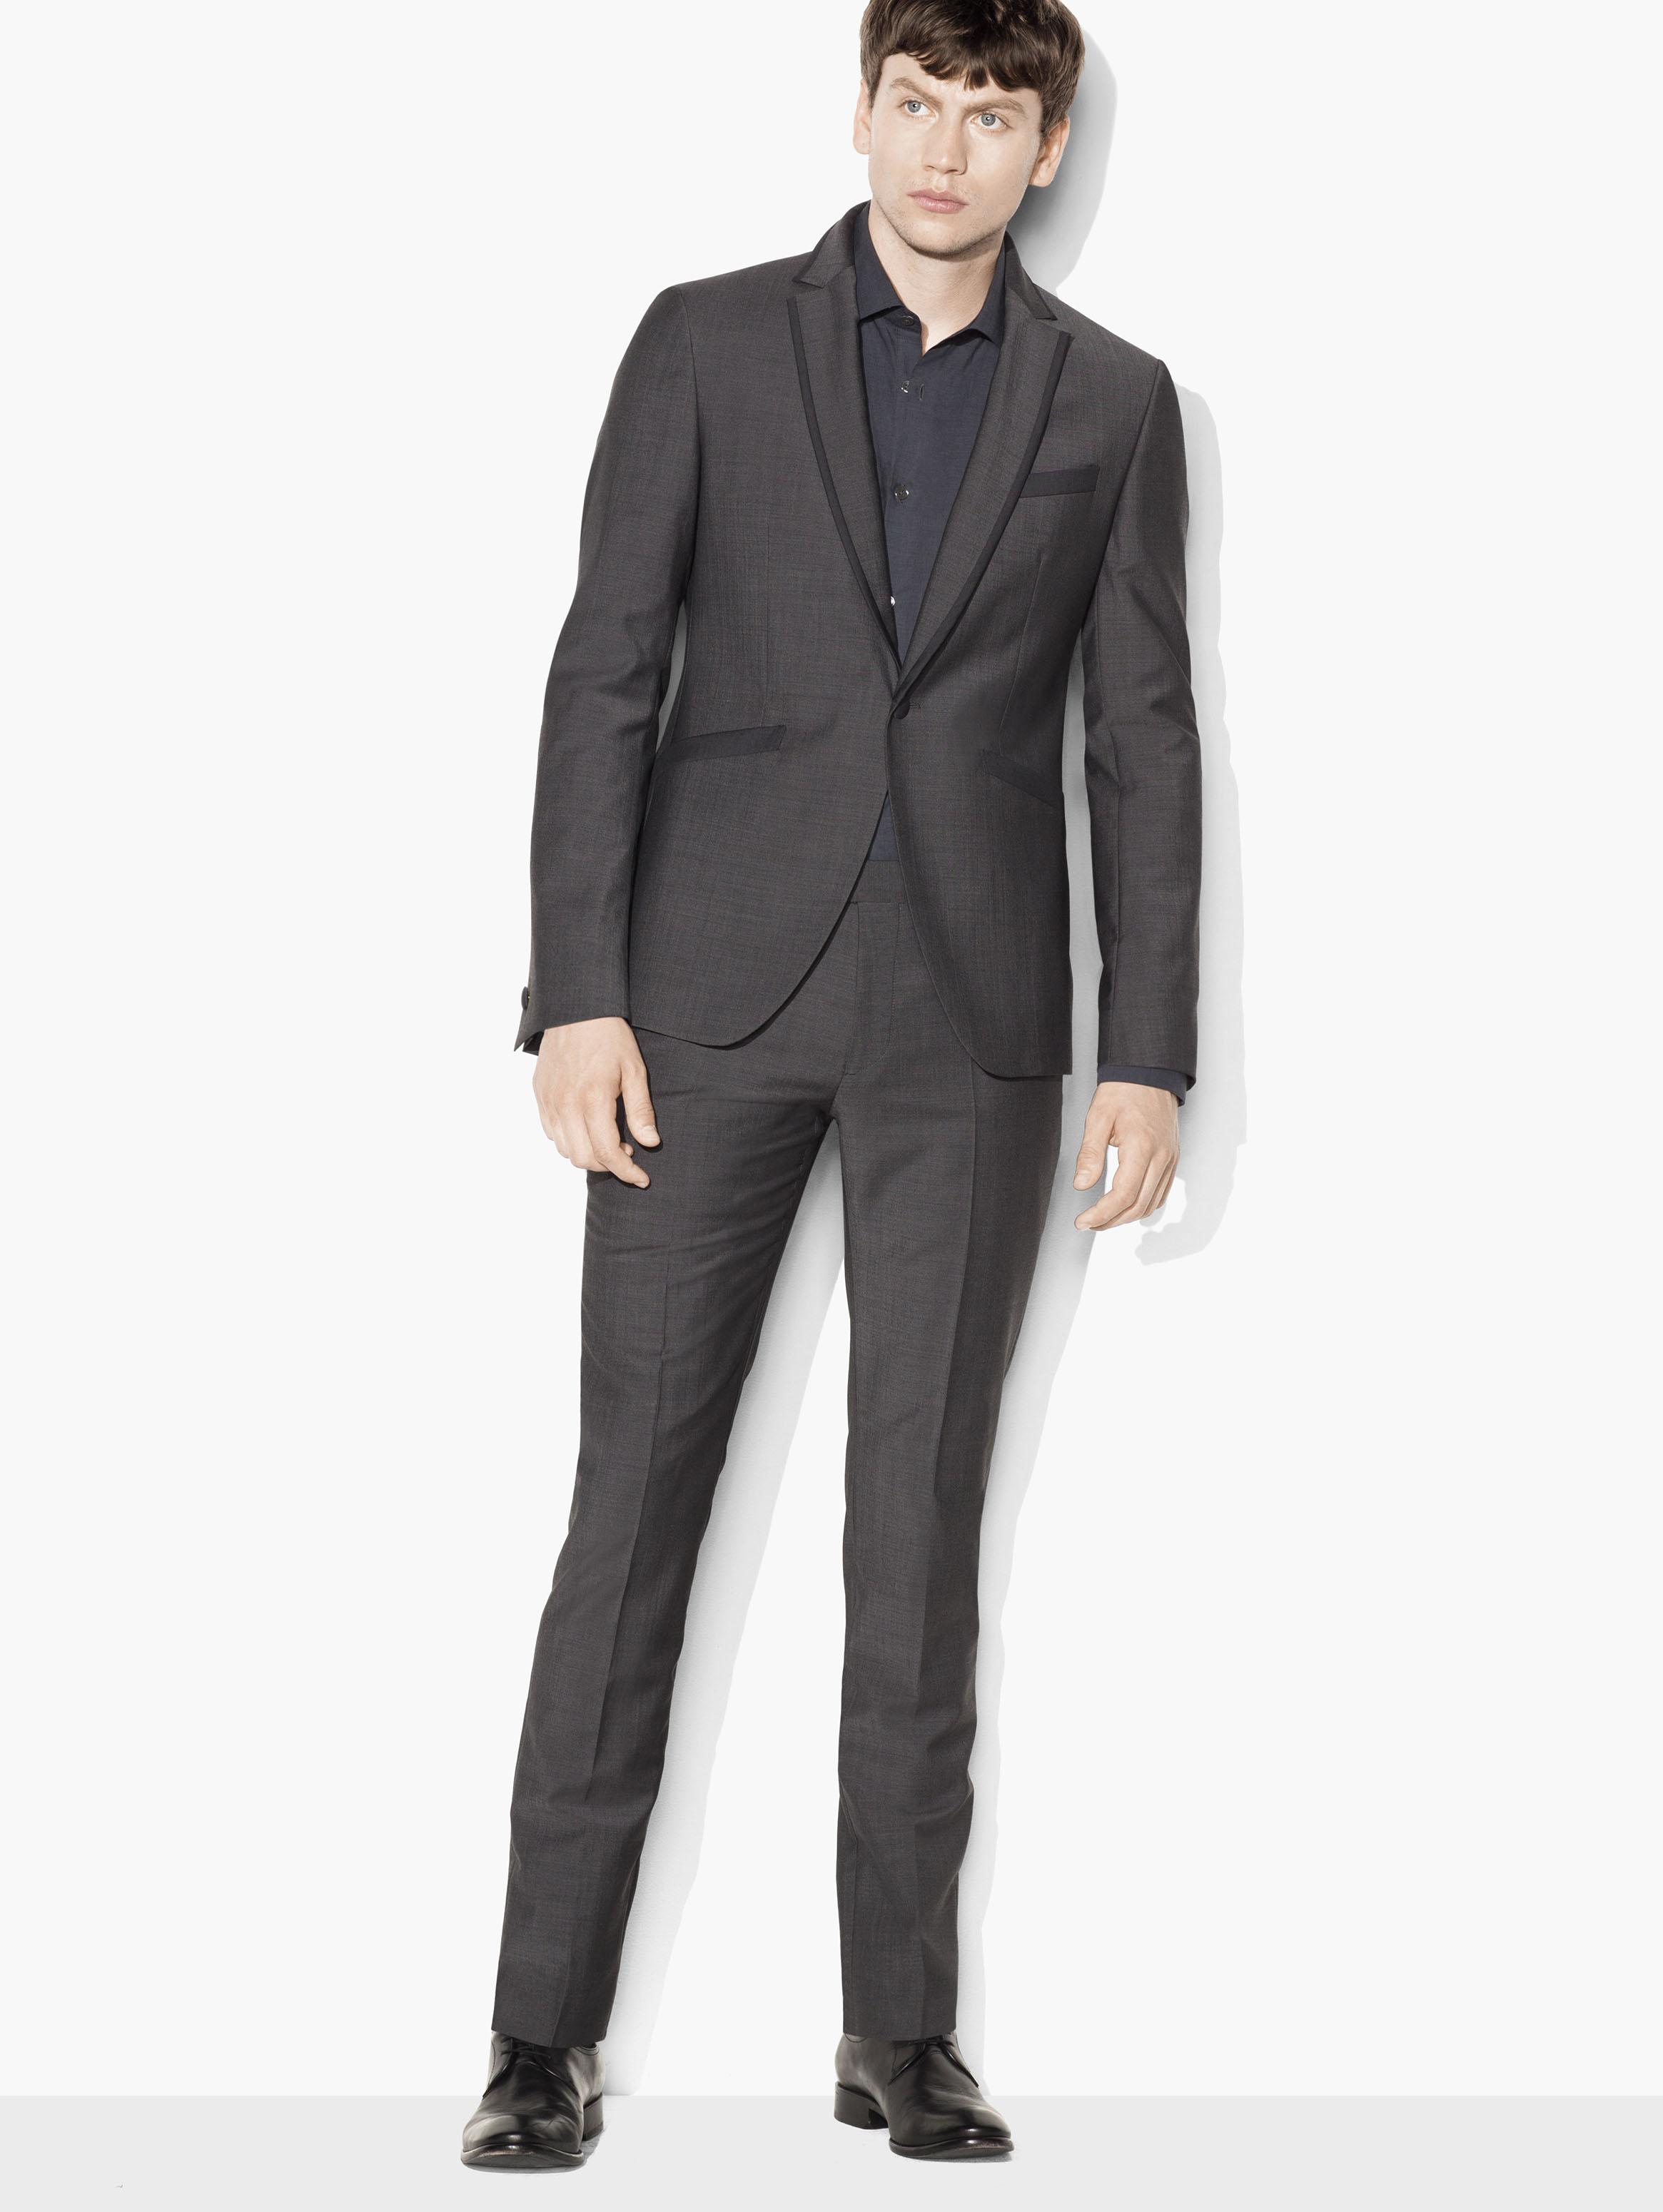 John Varvatos Suits and Men's Blazers at Menstyle USA